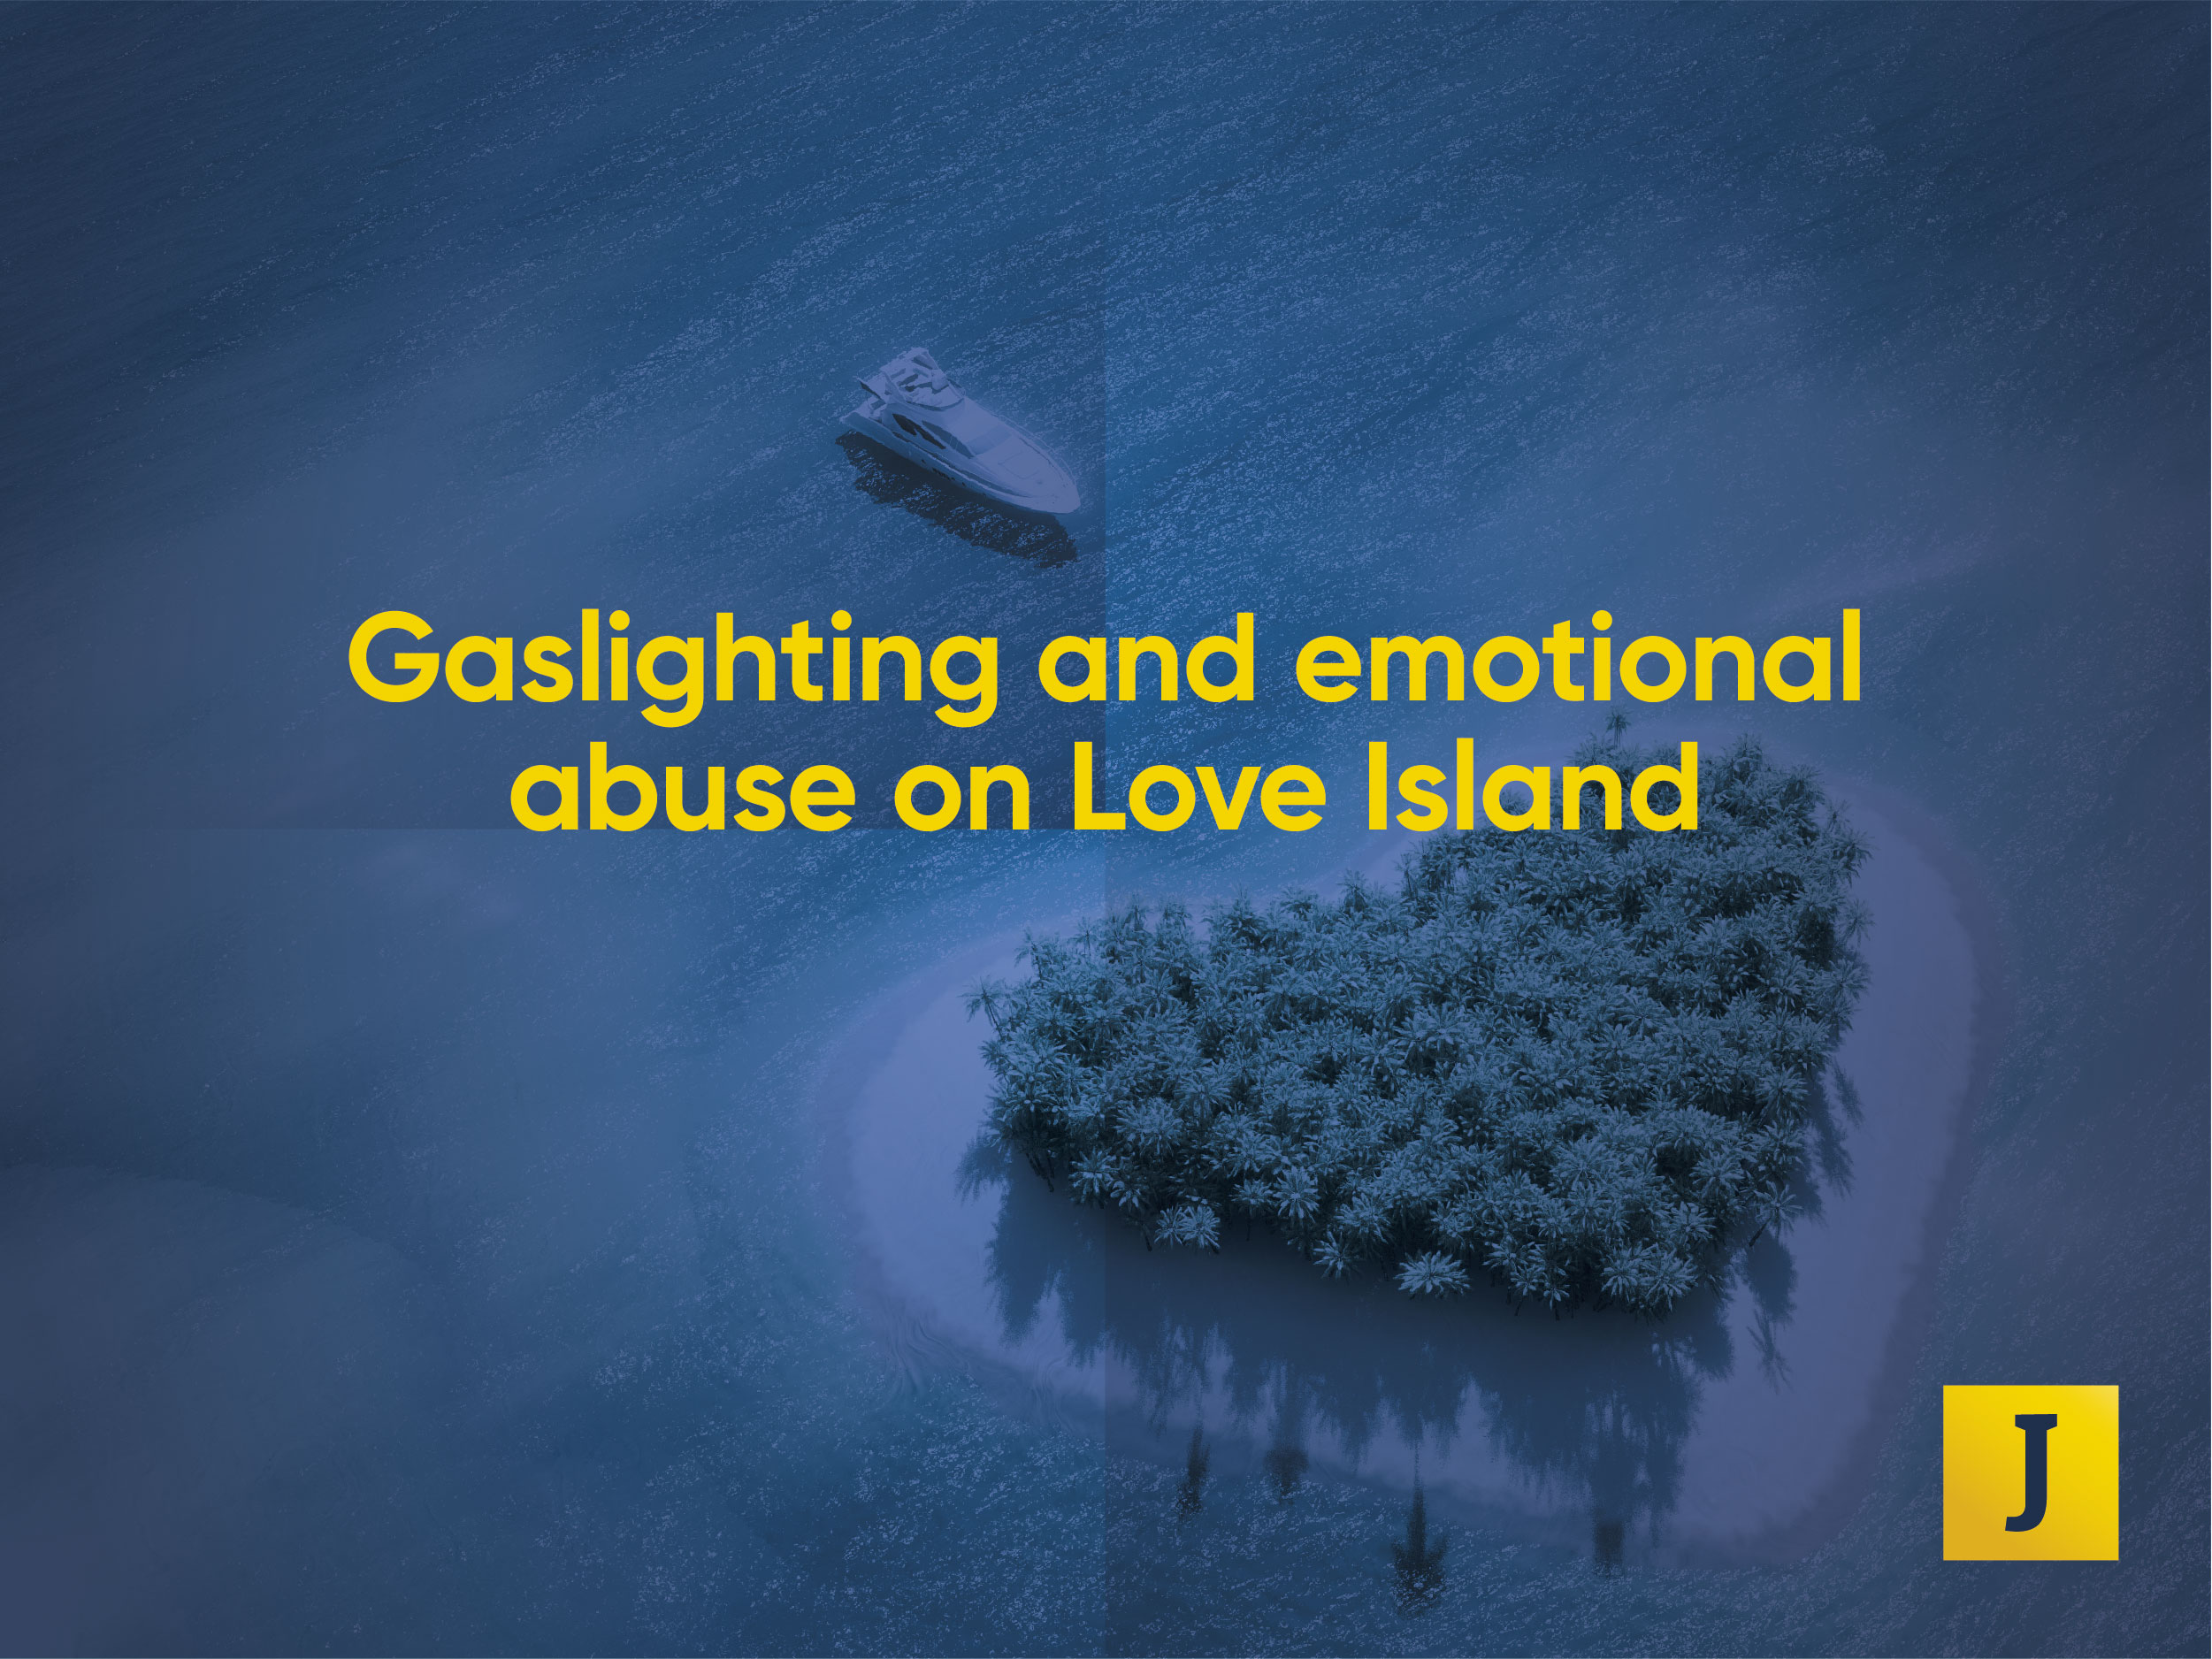 Gaslighting and emotional abuse on Love Island. Image of an island in the shape of a heart